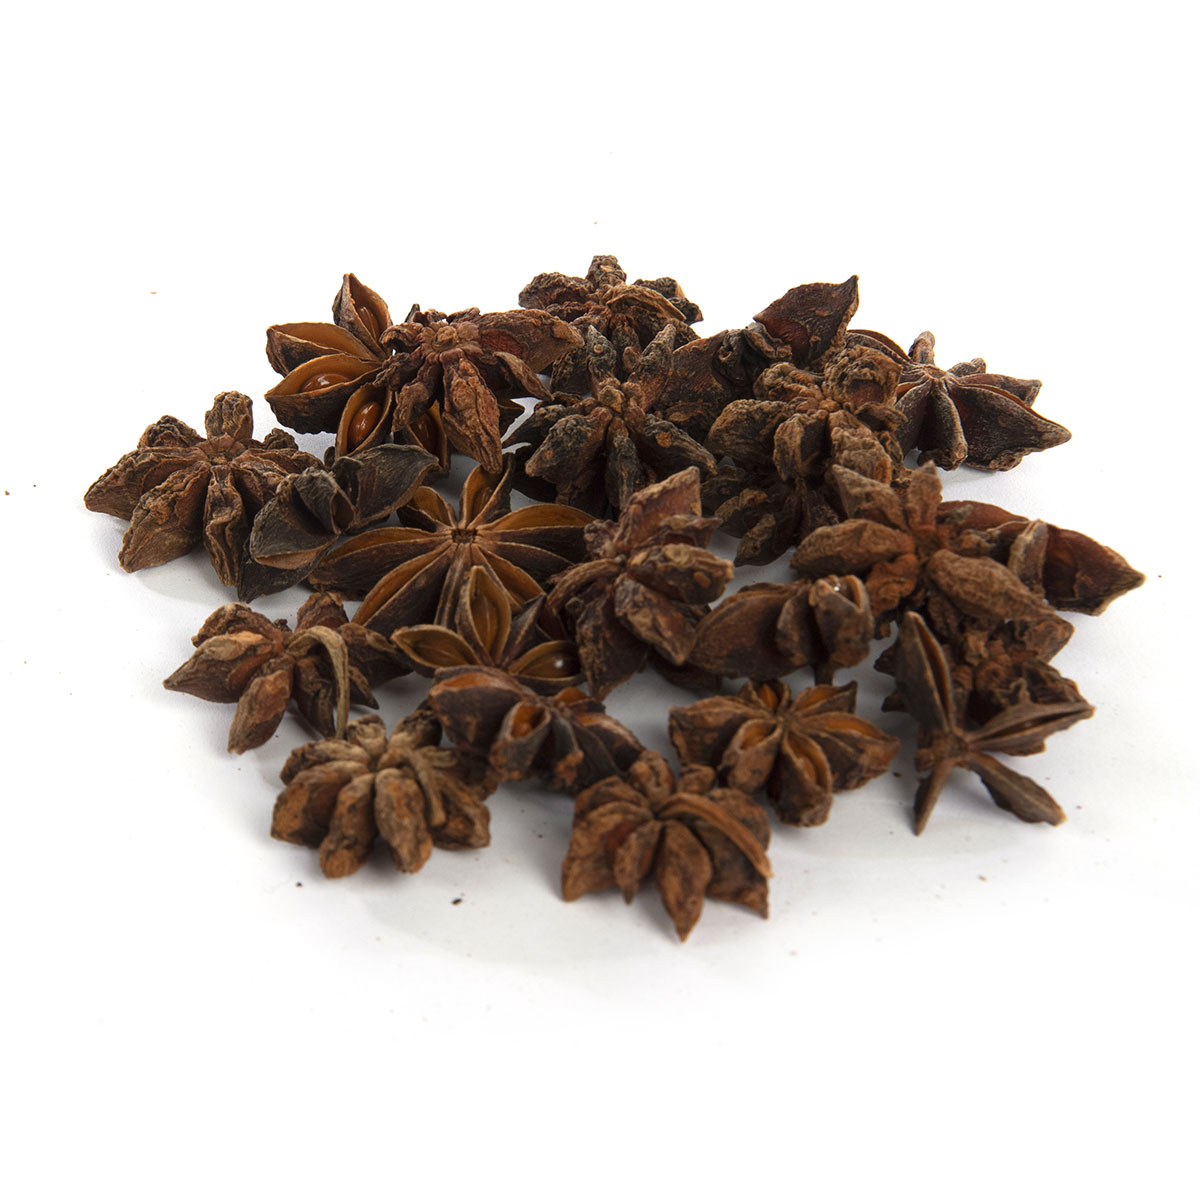 Seasoning Suppliers Online - Anise Whole Star